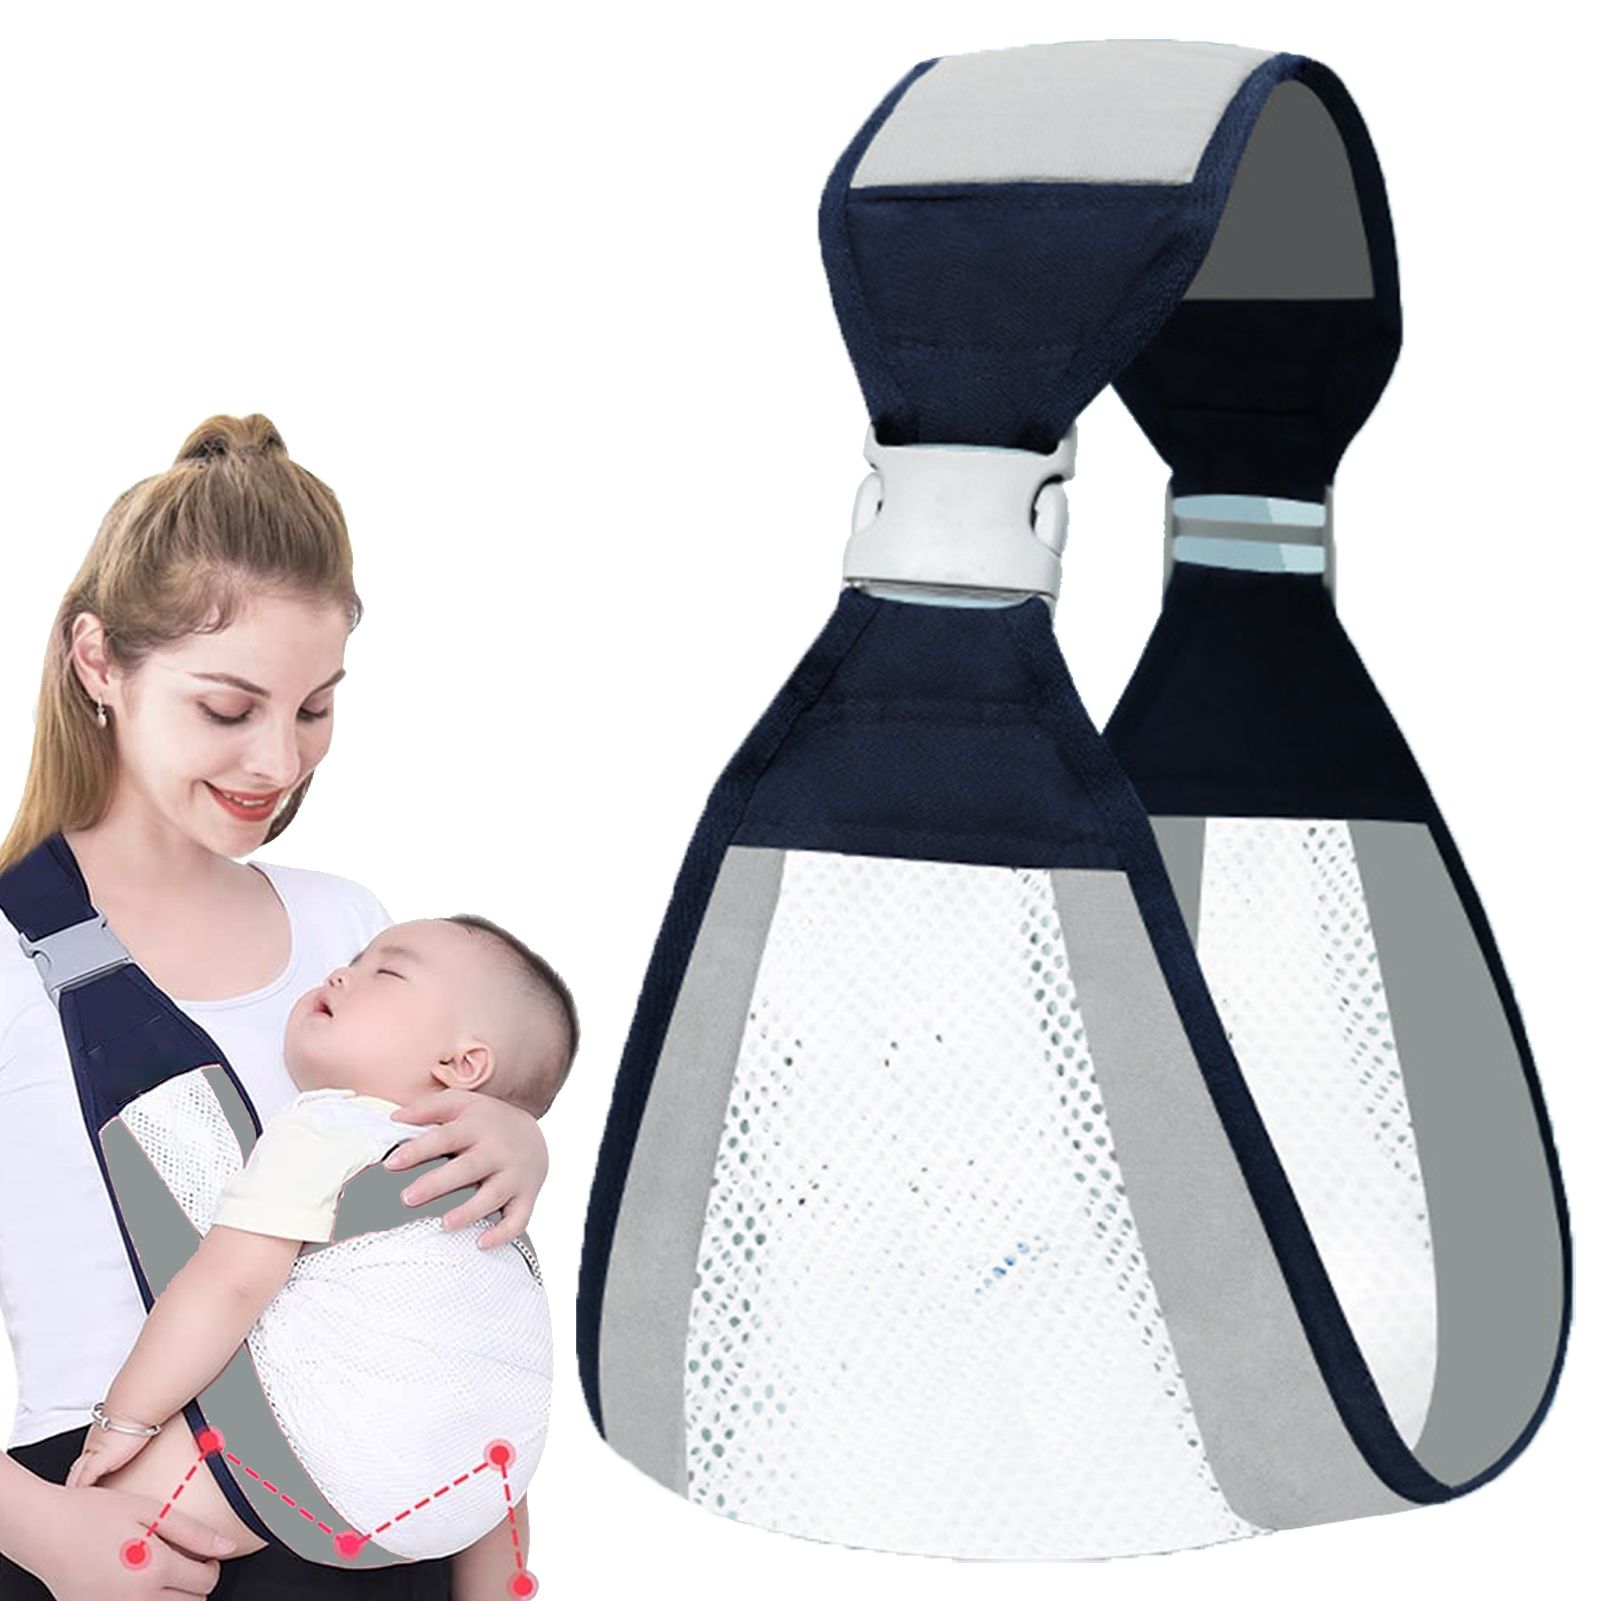 Baby Soft Carrier Ergonomic, Baby Sling Strap Adjustable, Multifunctional Baby Carrier Bag,baby safety in bikes , cars,baby safety belt